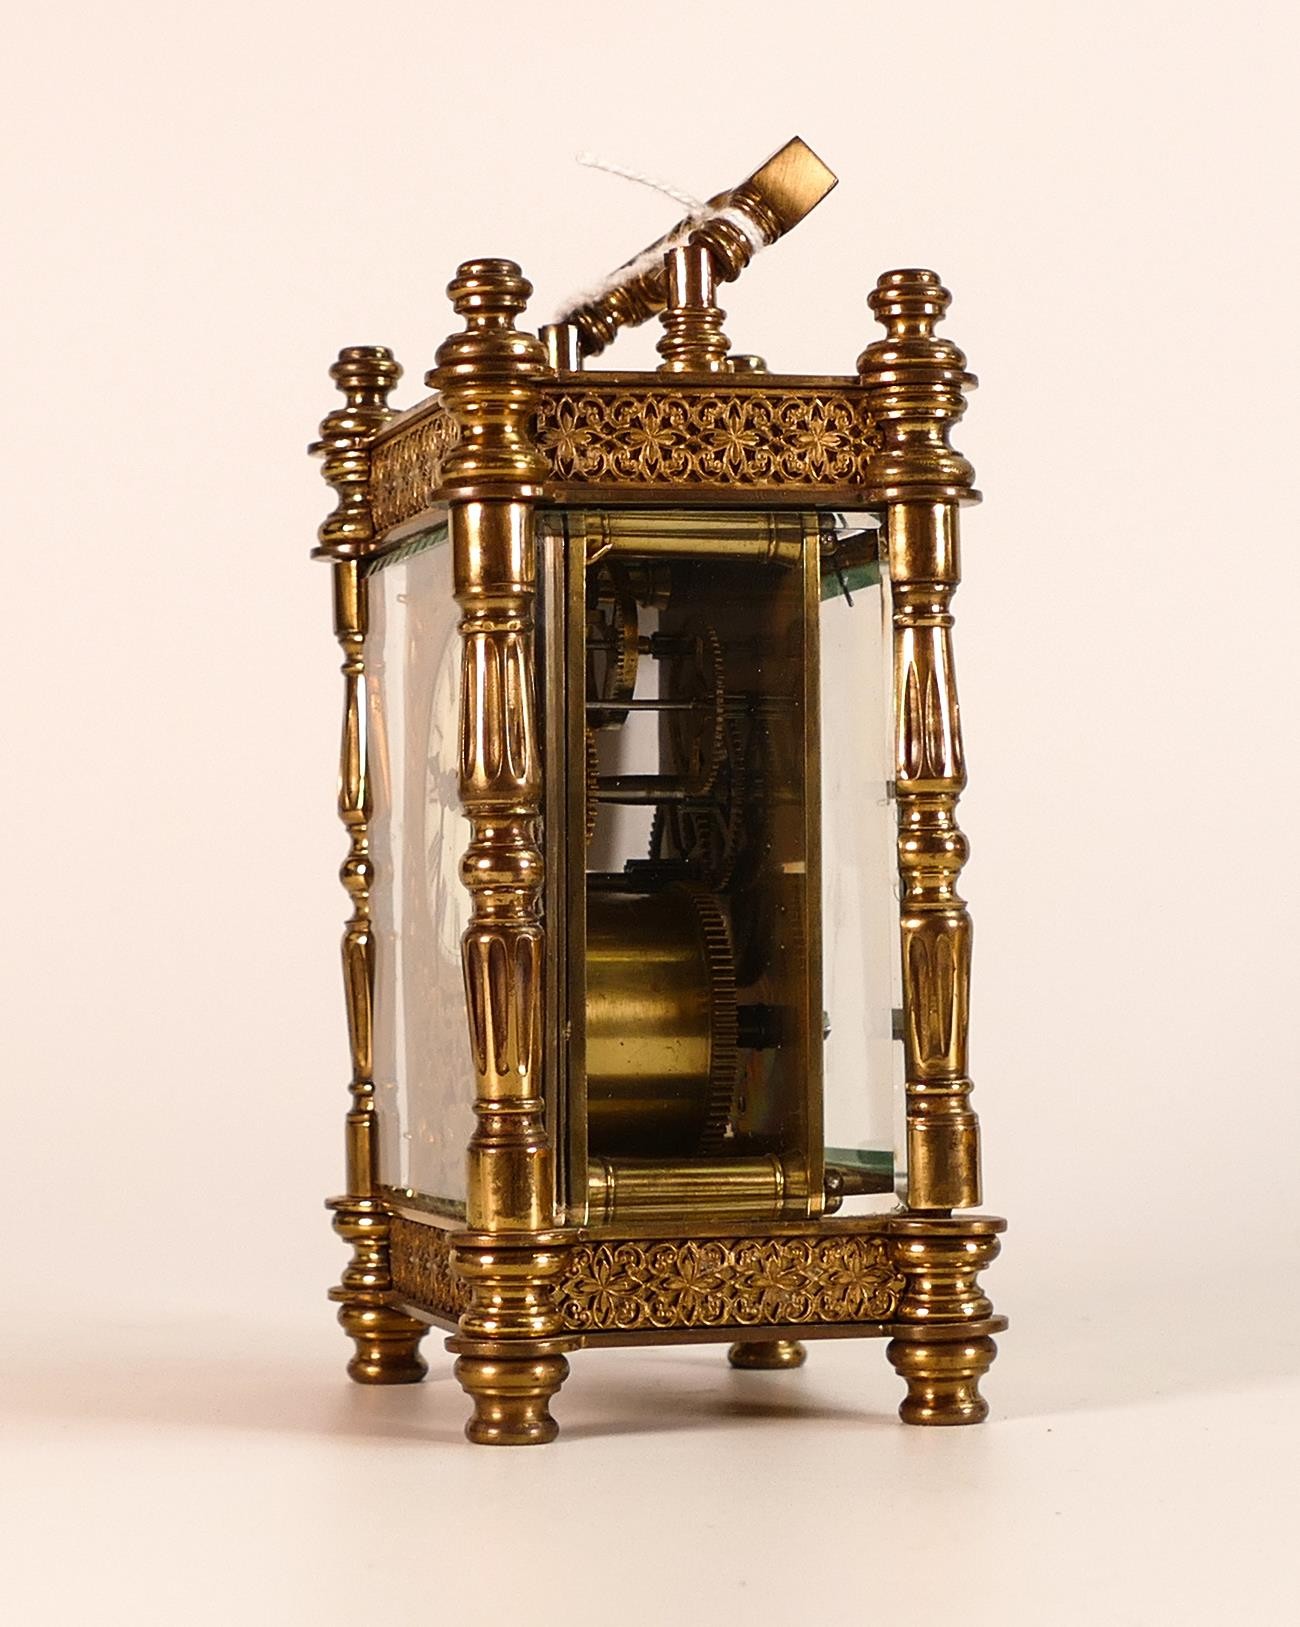 Exceedingly ornate brass carriage clock, late 19th century, no key, sold as not working. 15cm high - Image 2 of 6